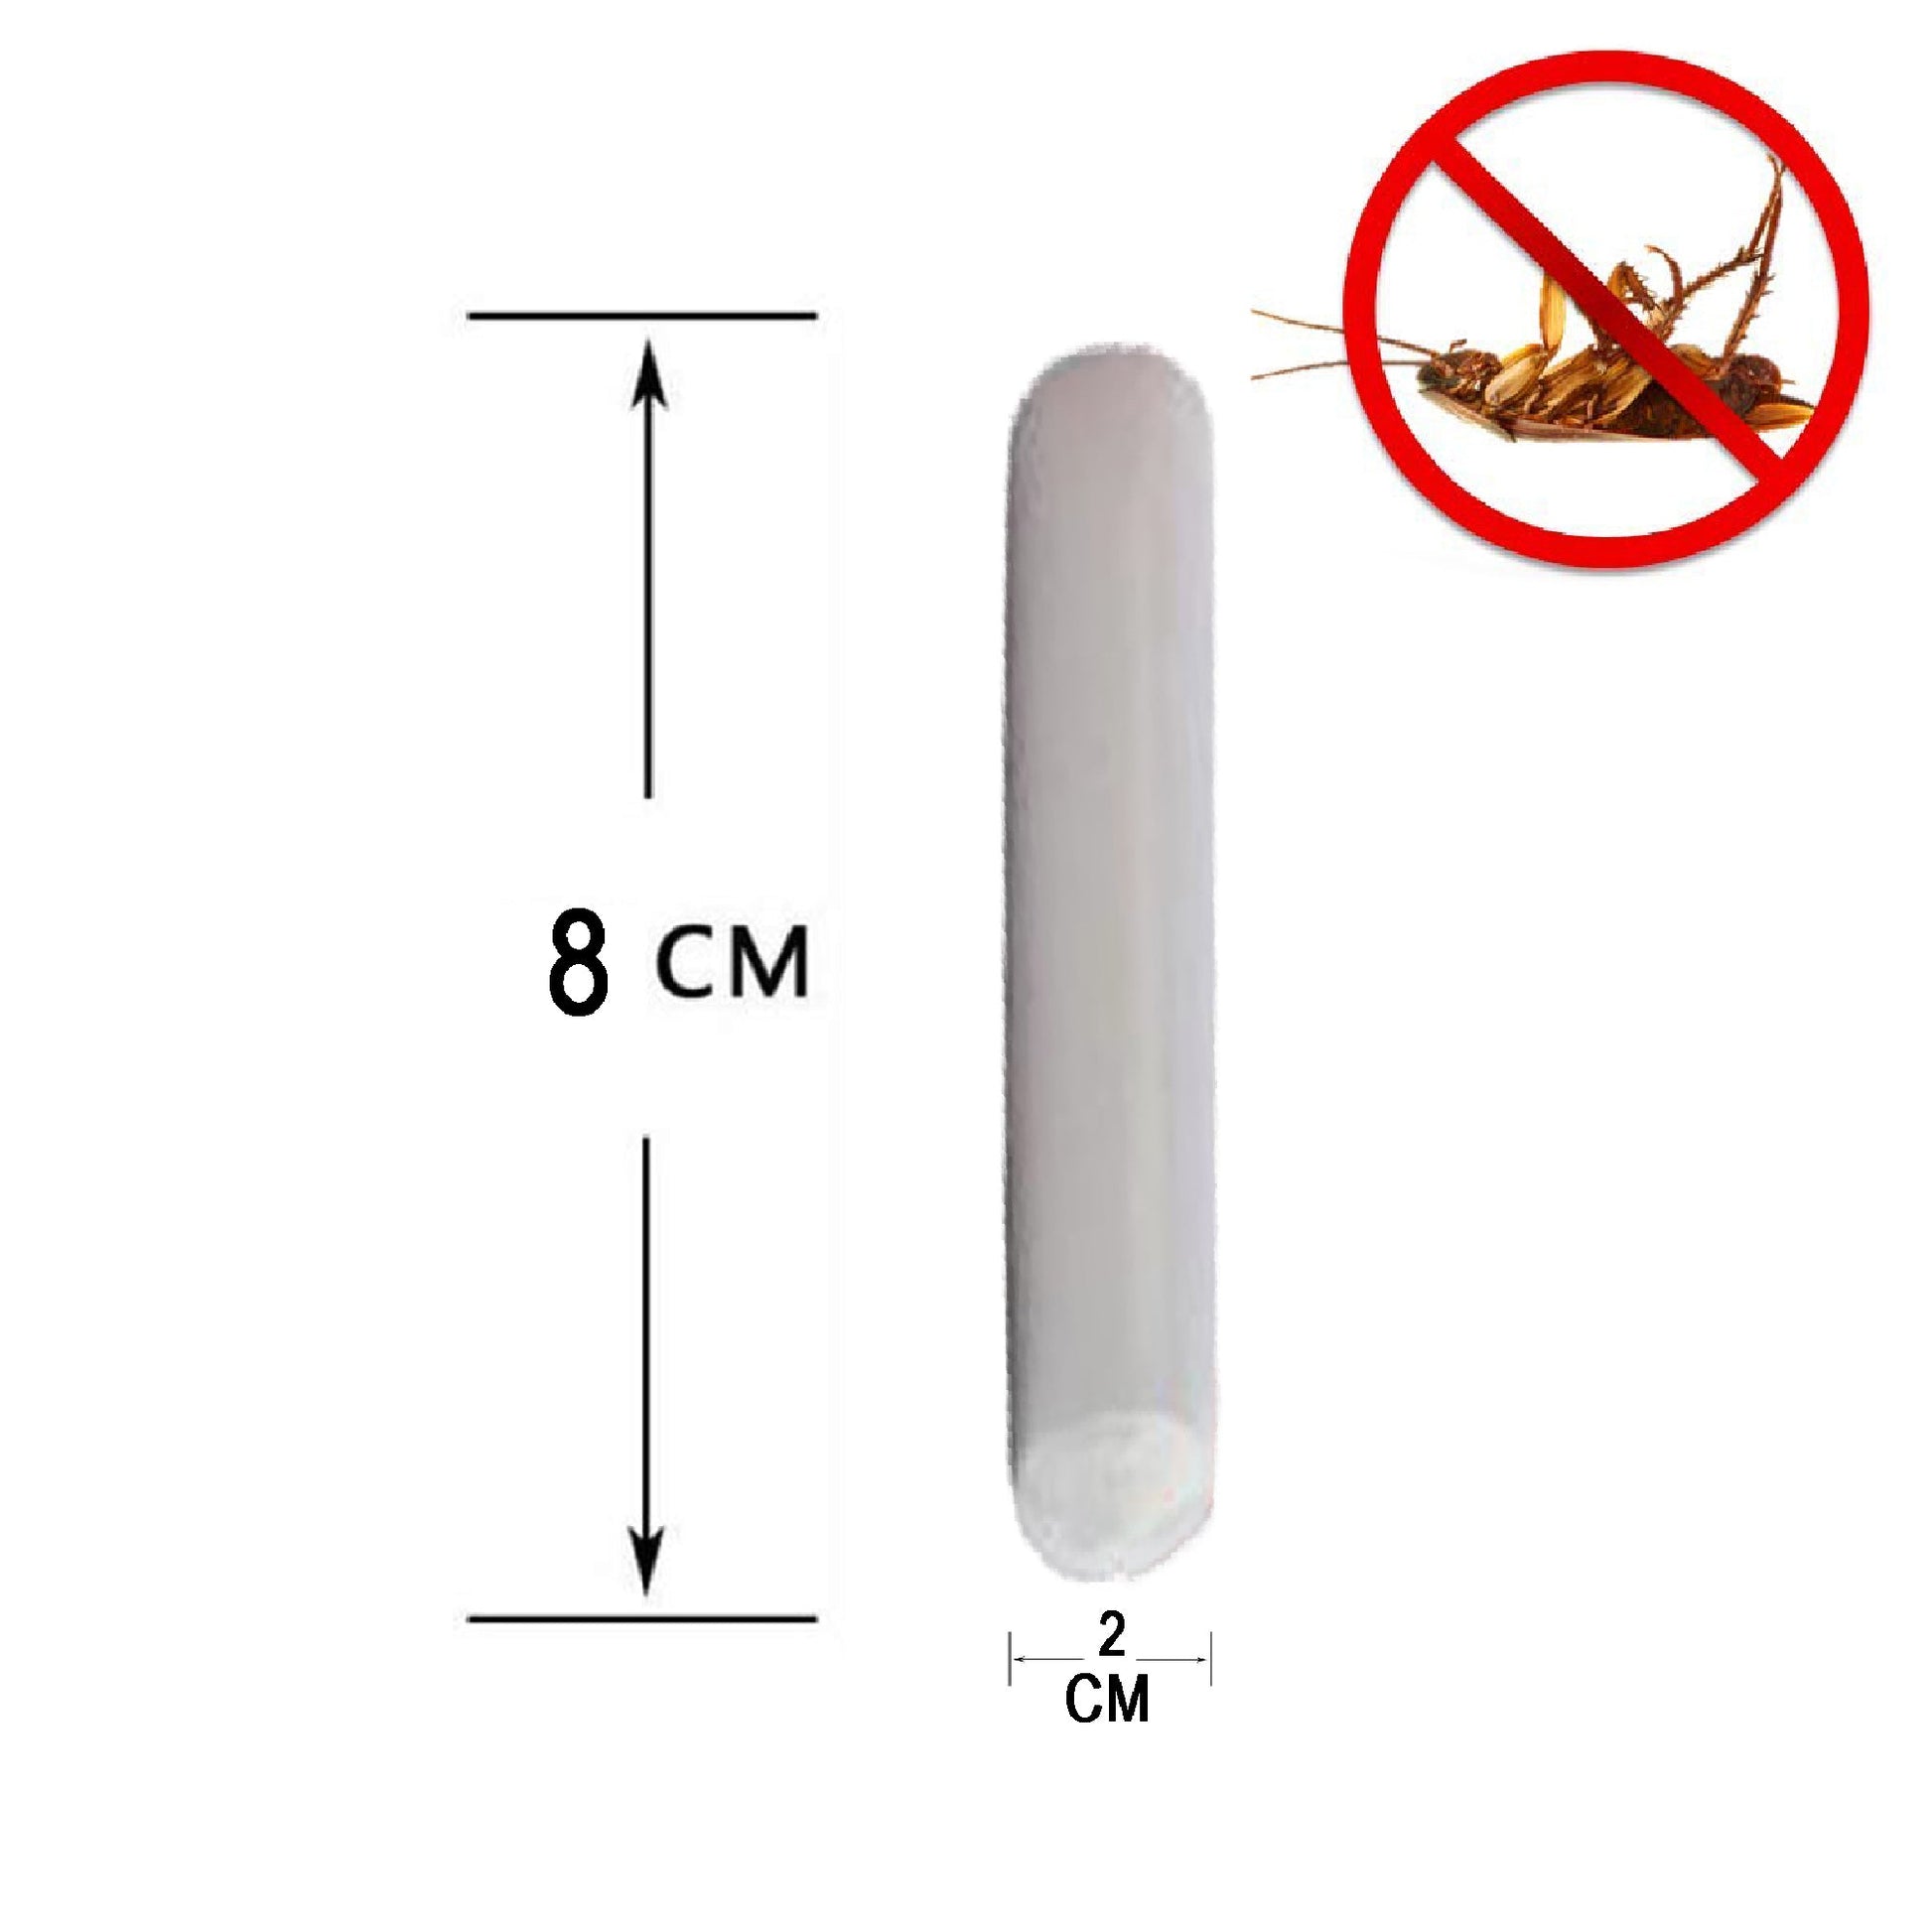 1315 Cockroaches Repellent Chalk Keep Cockroach Away (Pack of 12) 